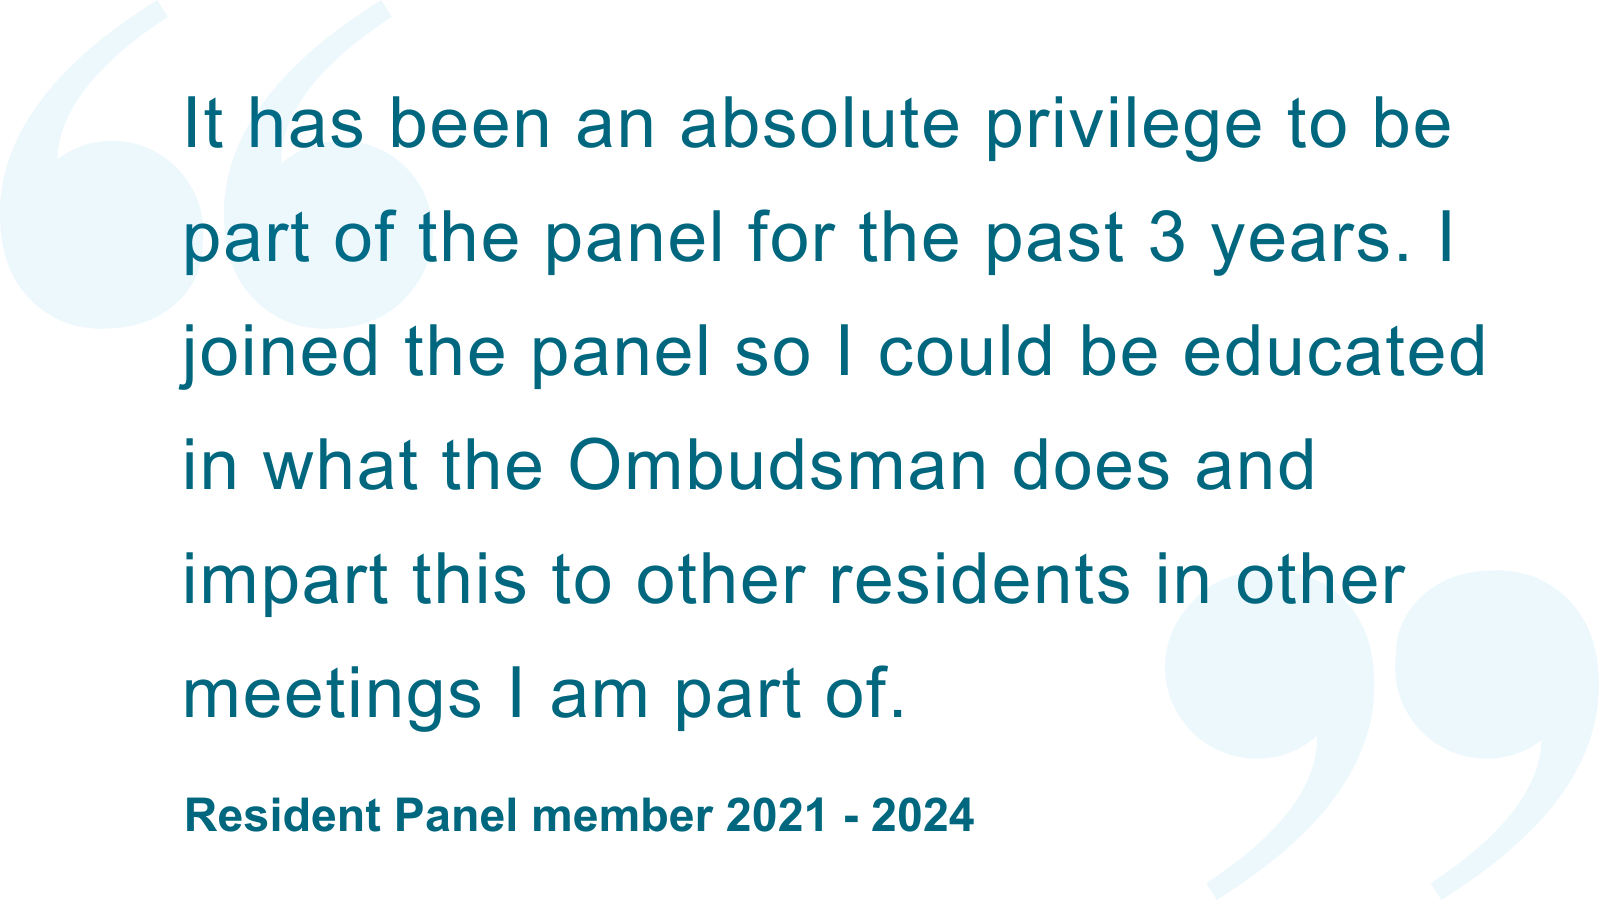 ‘It has been an absolute privilege to be part of the panel for the past 3 years. I joined the panel so I could be educated in what the Ombudsman does and impart this to other residents in other meetings I am part of.’